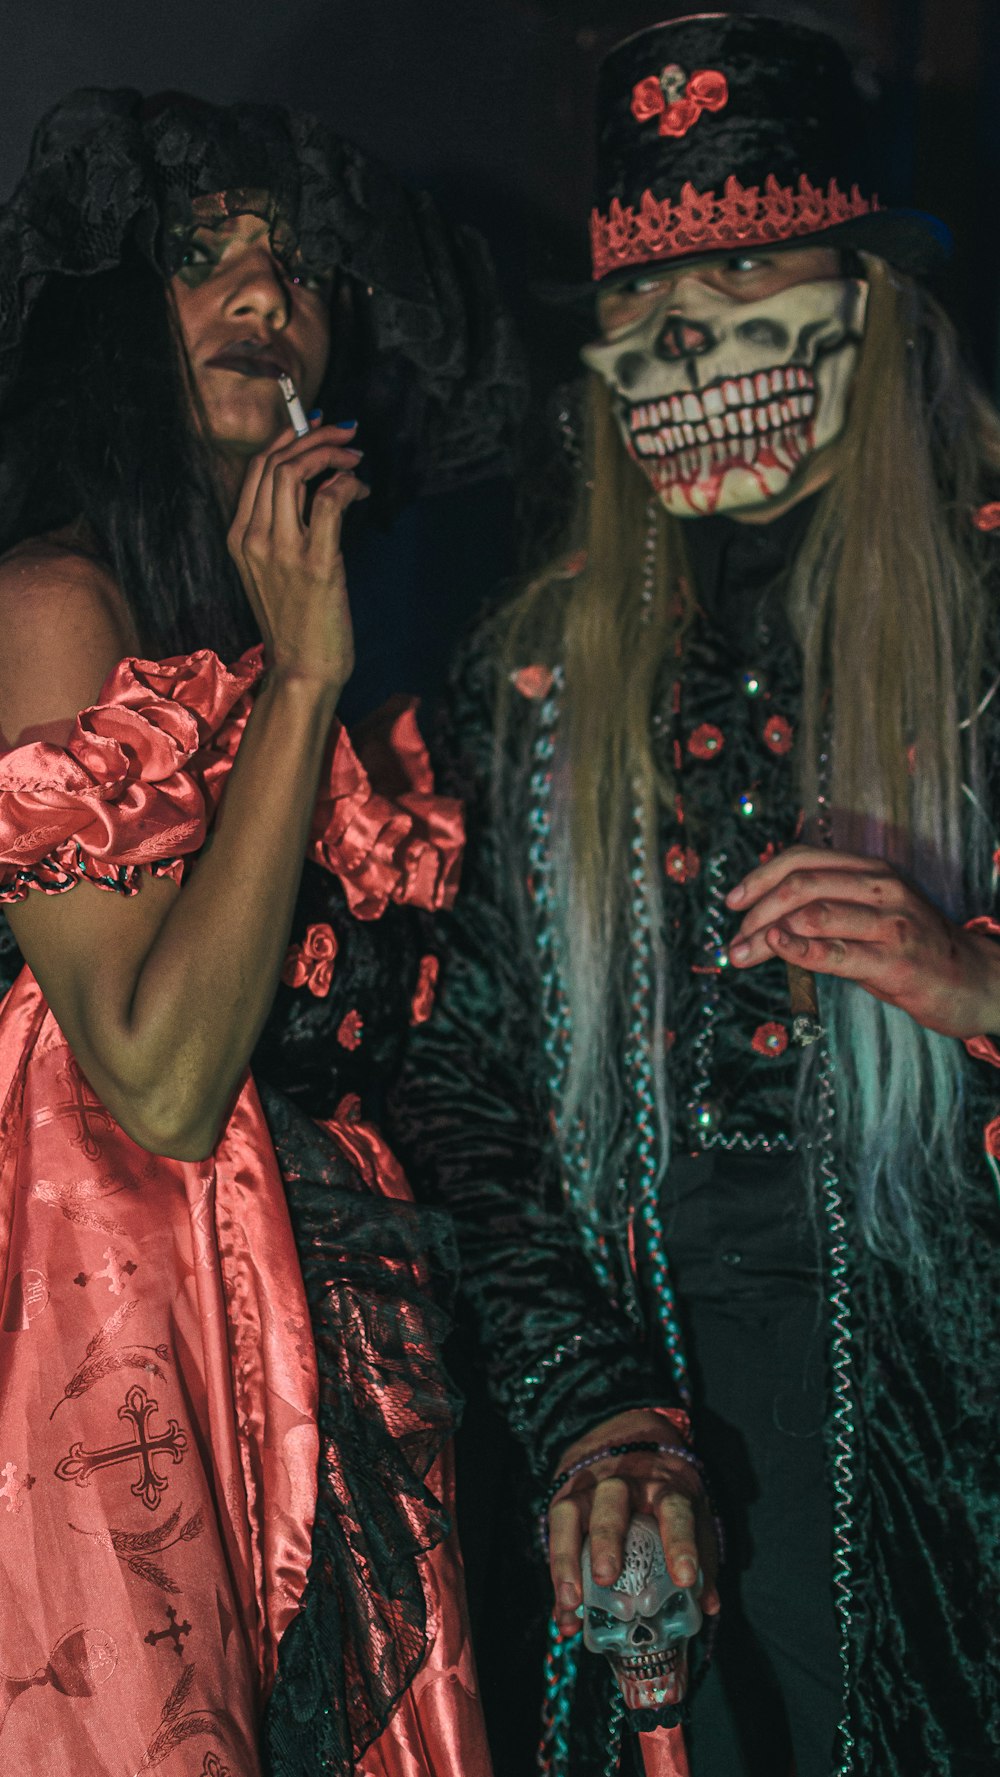 two women dressed in costumes smoking a cigarette